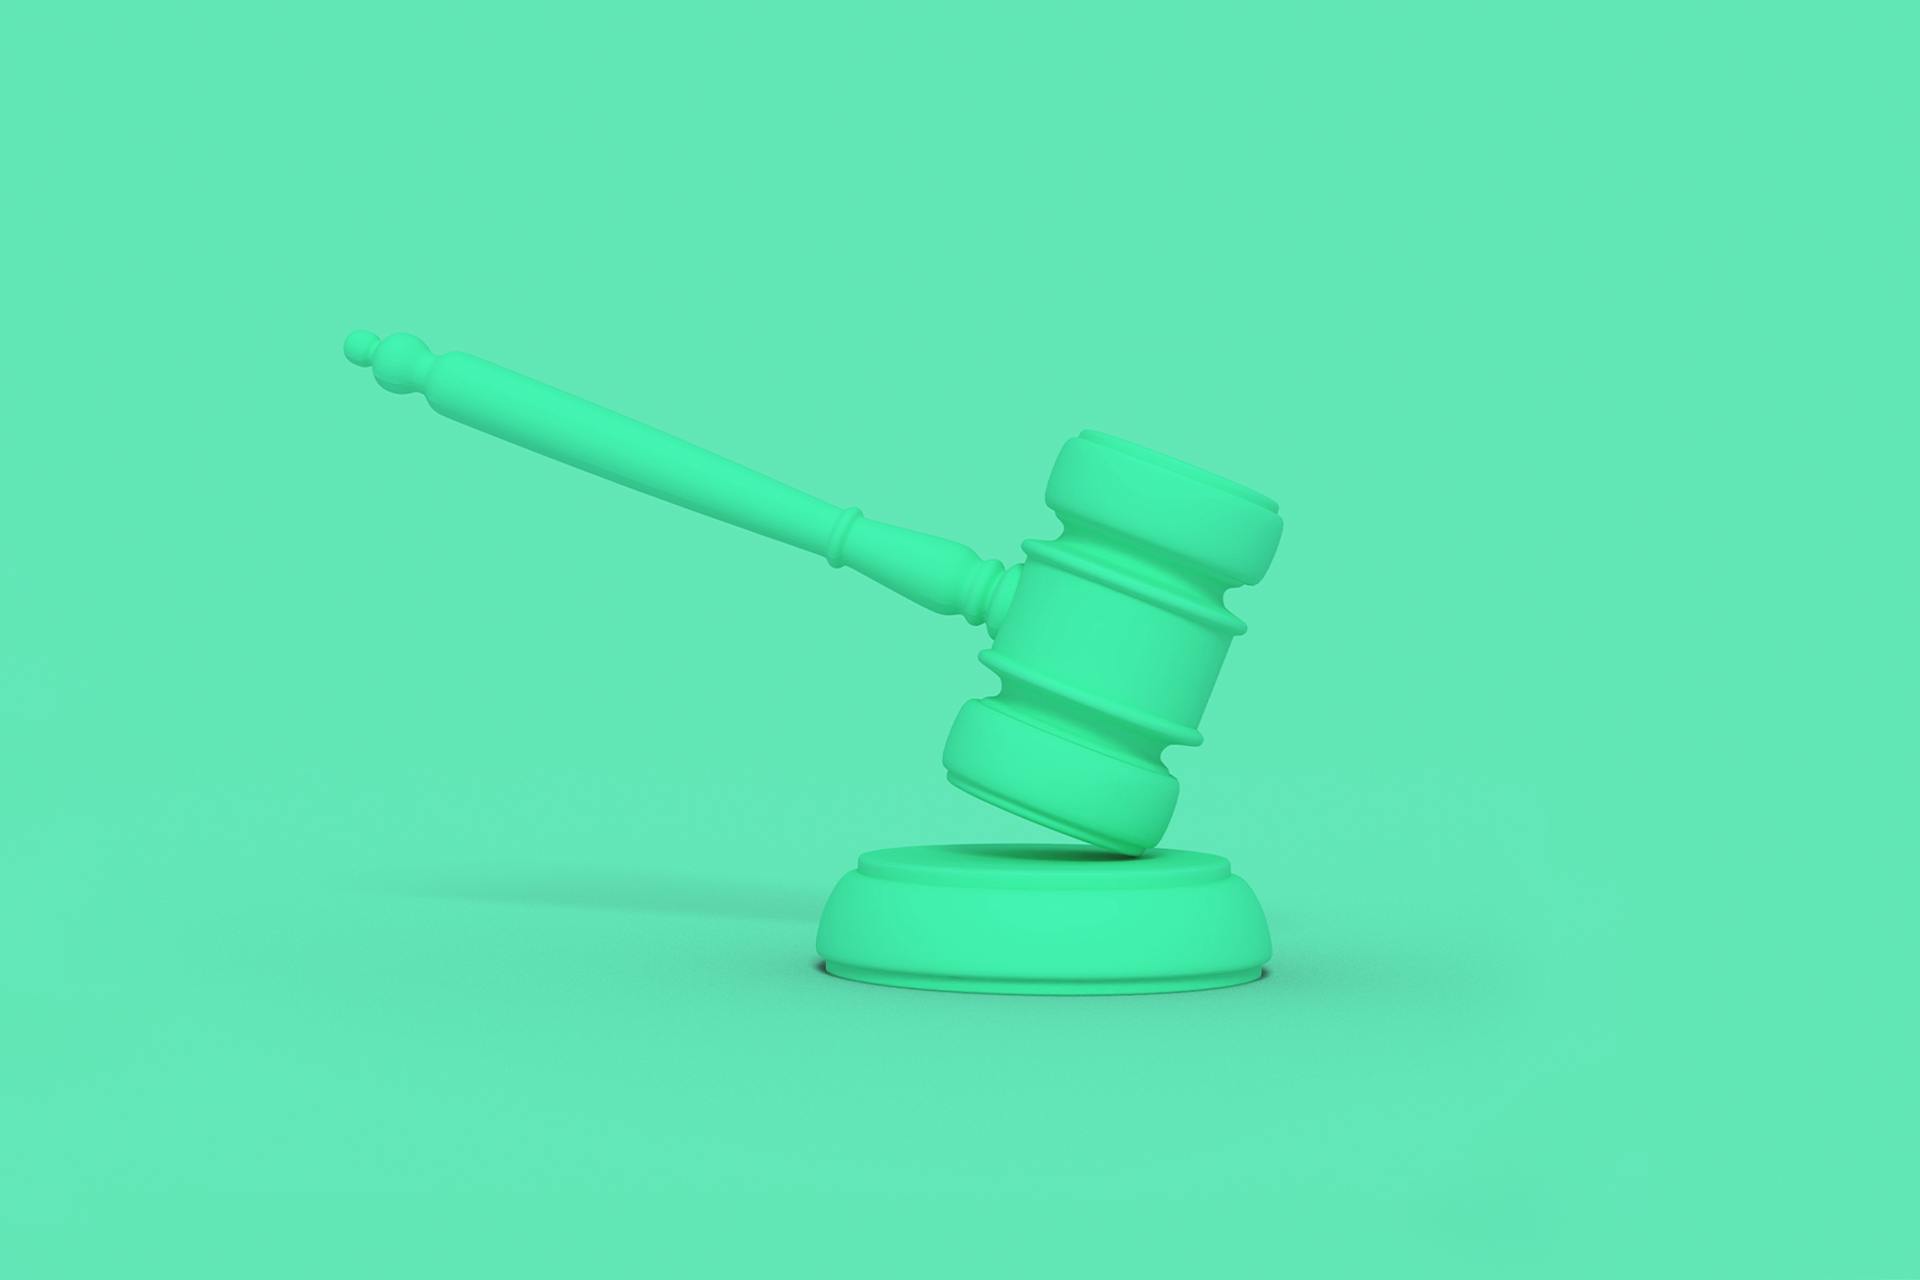 The judgement is in on your PR reputation! A green cartoon gavel is pictured being stuck down against a green backdrop